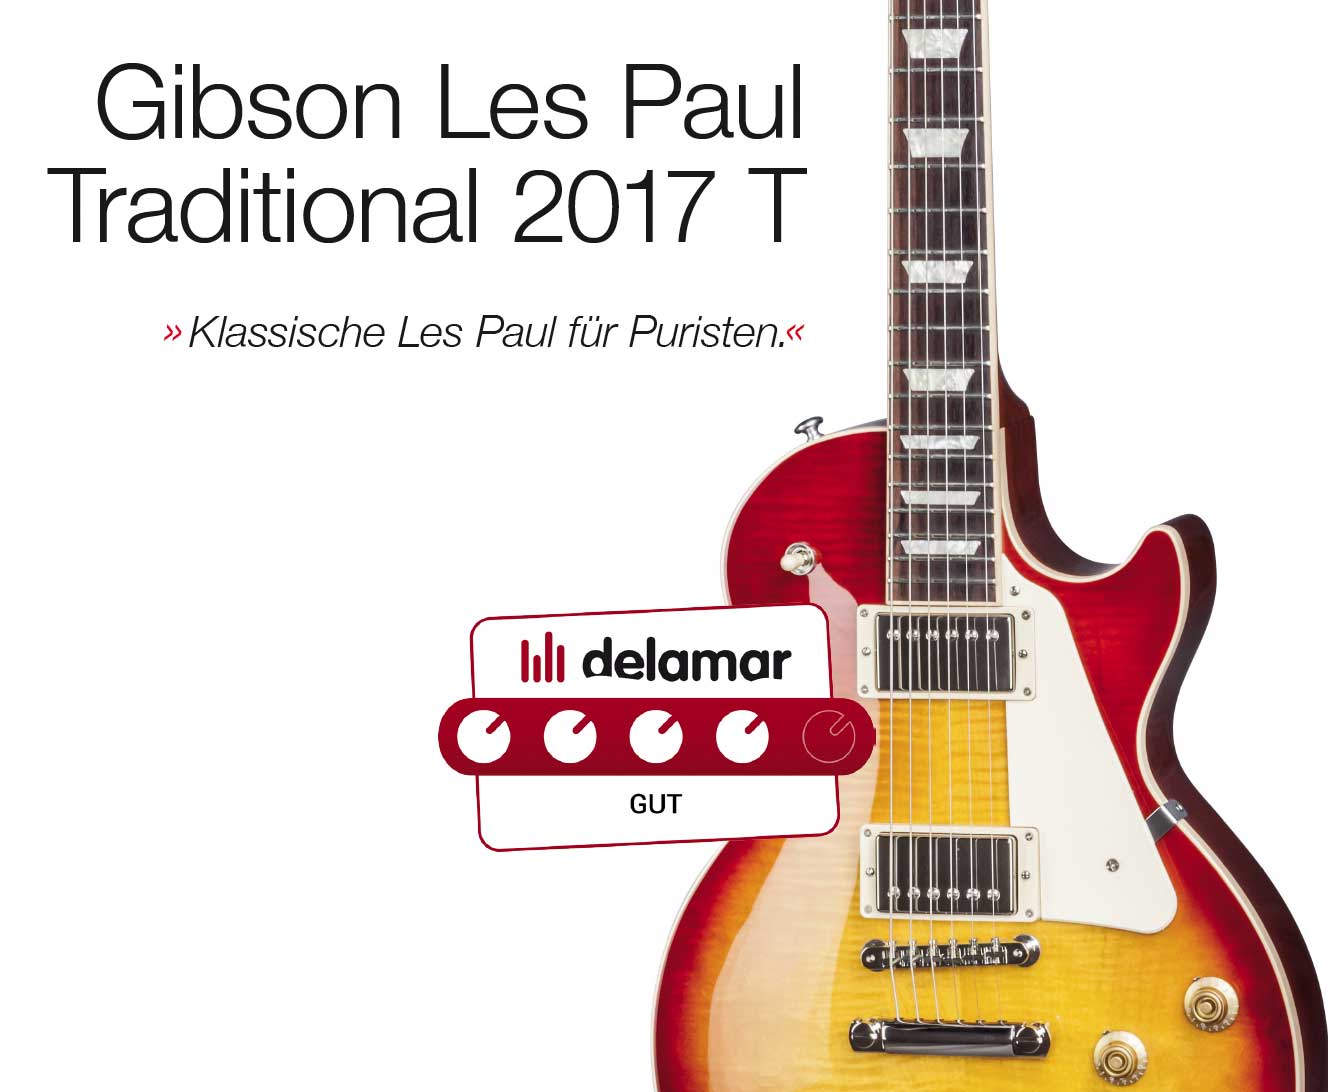 Gibson Les Paul Traditional 2017 T Heritage Cherry Sunburst | MUSIC STORE  professional